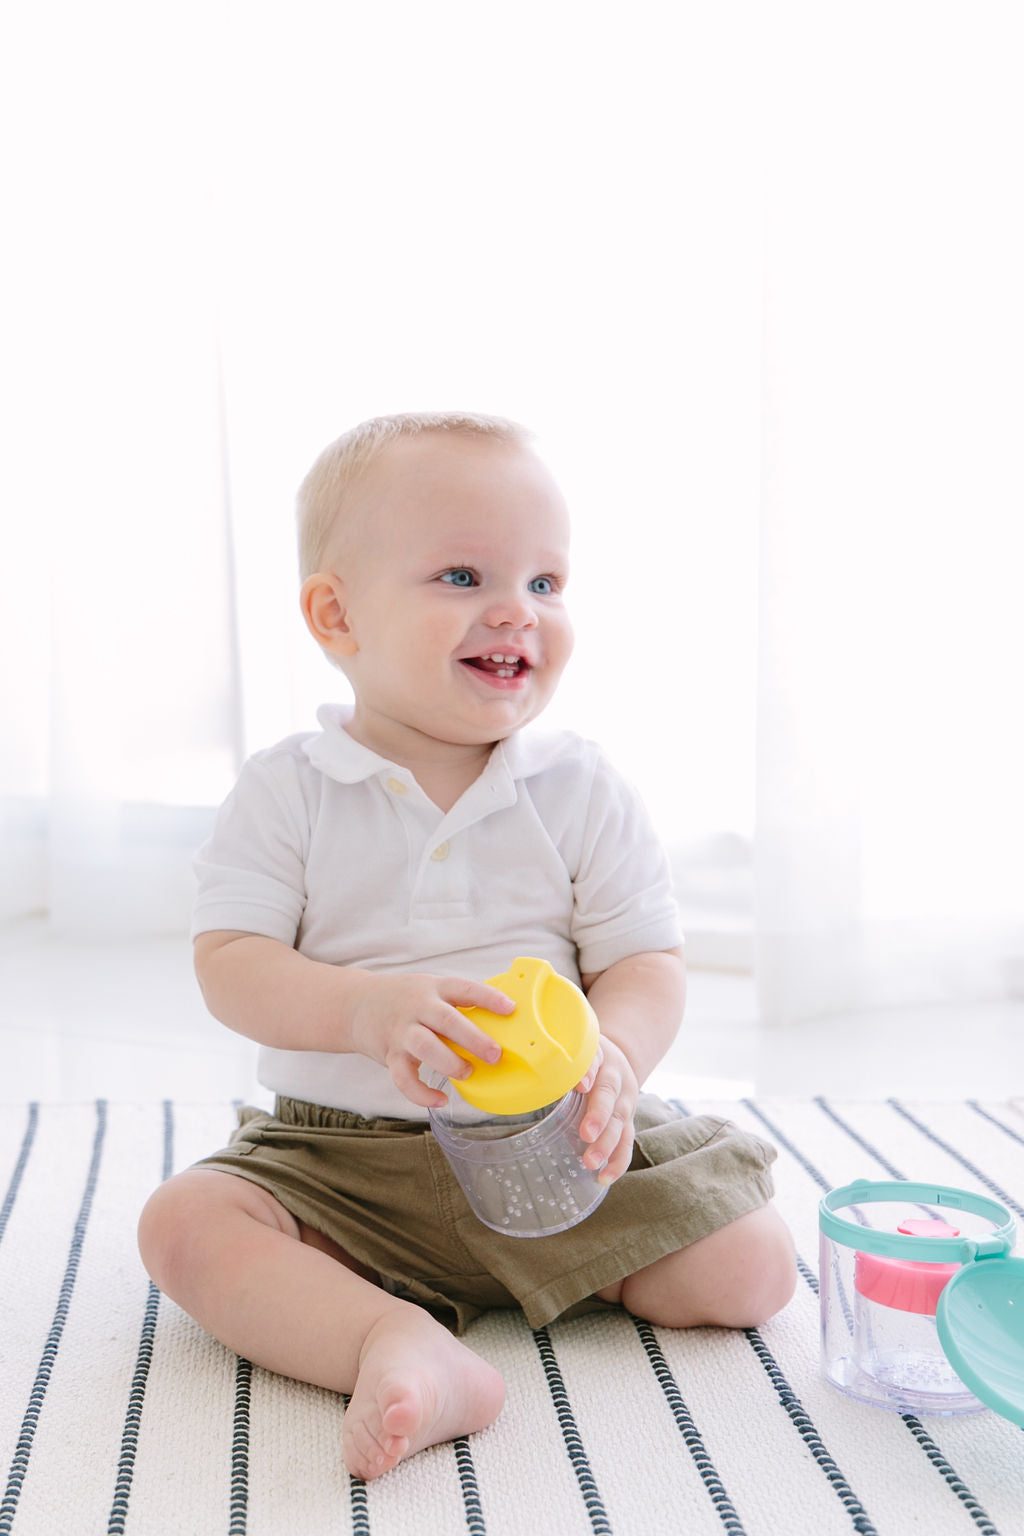 Best educational toys for 11-month-old babies